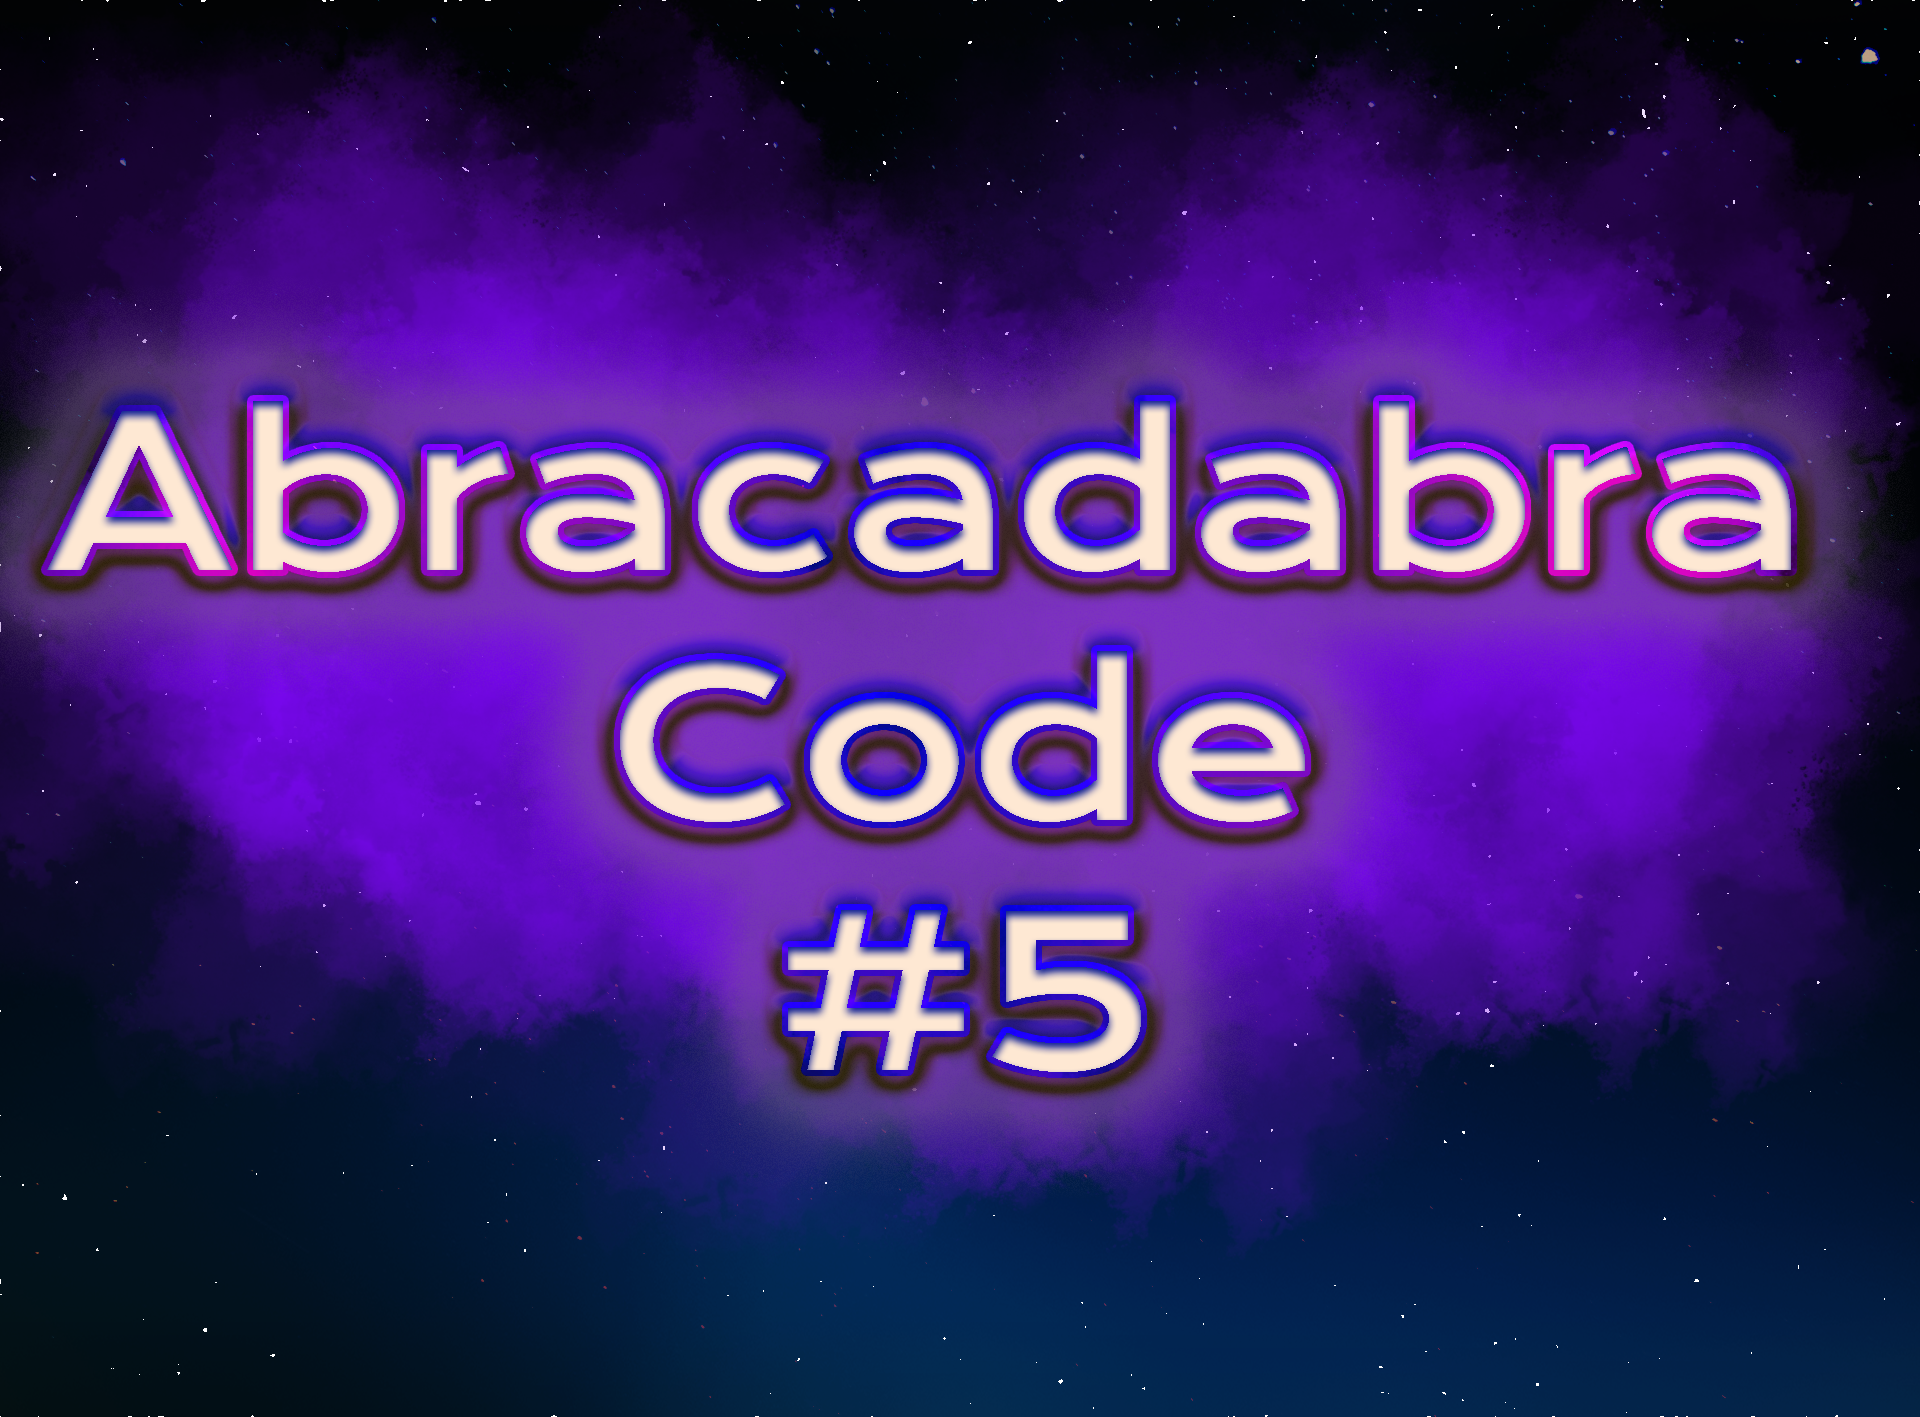 Abracadabra Code #5 Podcast Non Entity & Double Beat (clause 58 Criminal Justice Bill) chit chat with cabin crew 2/10